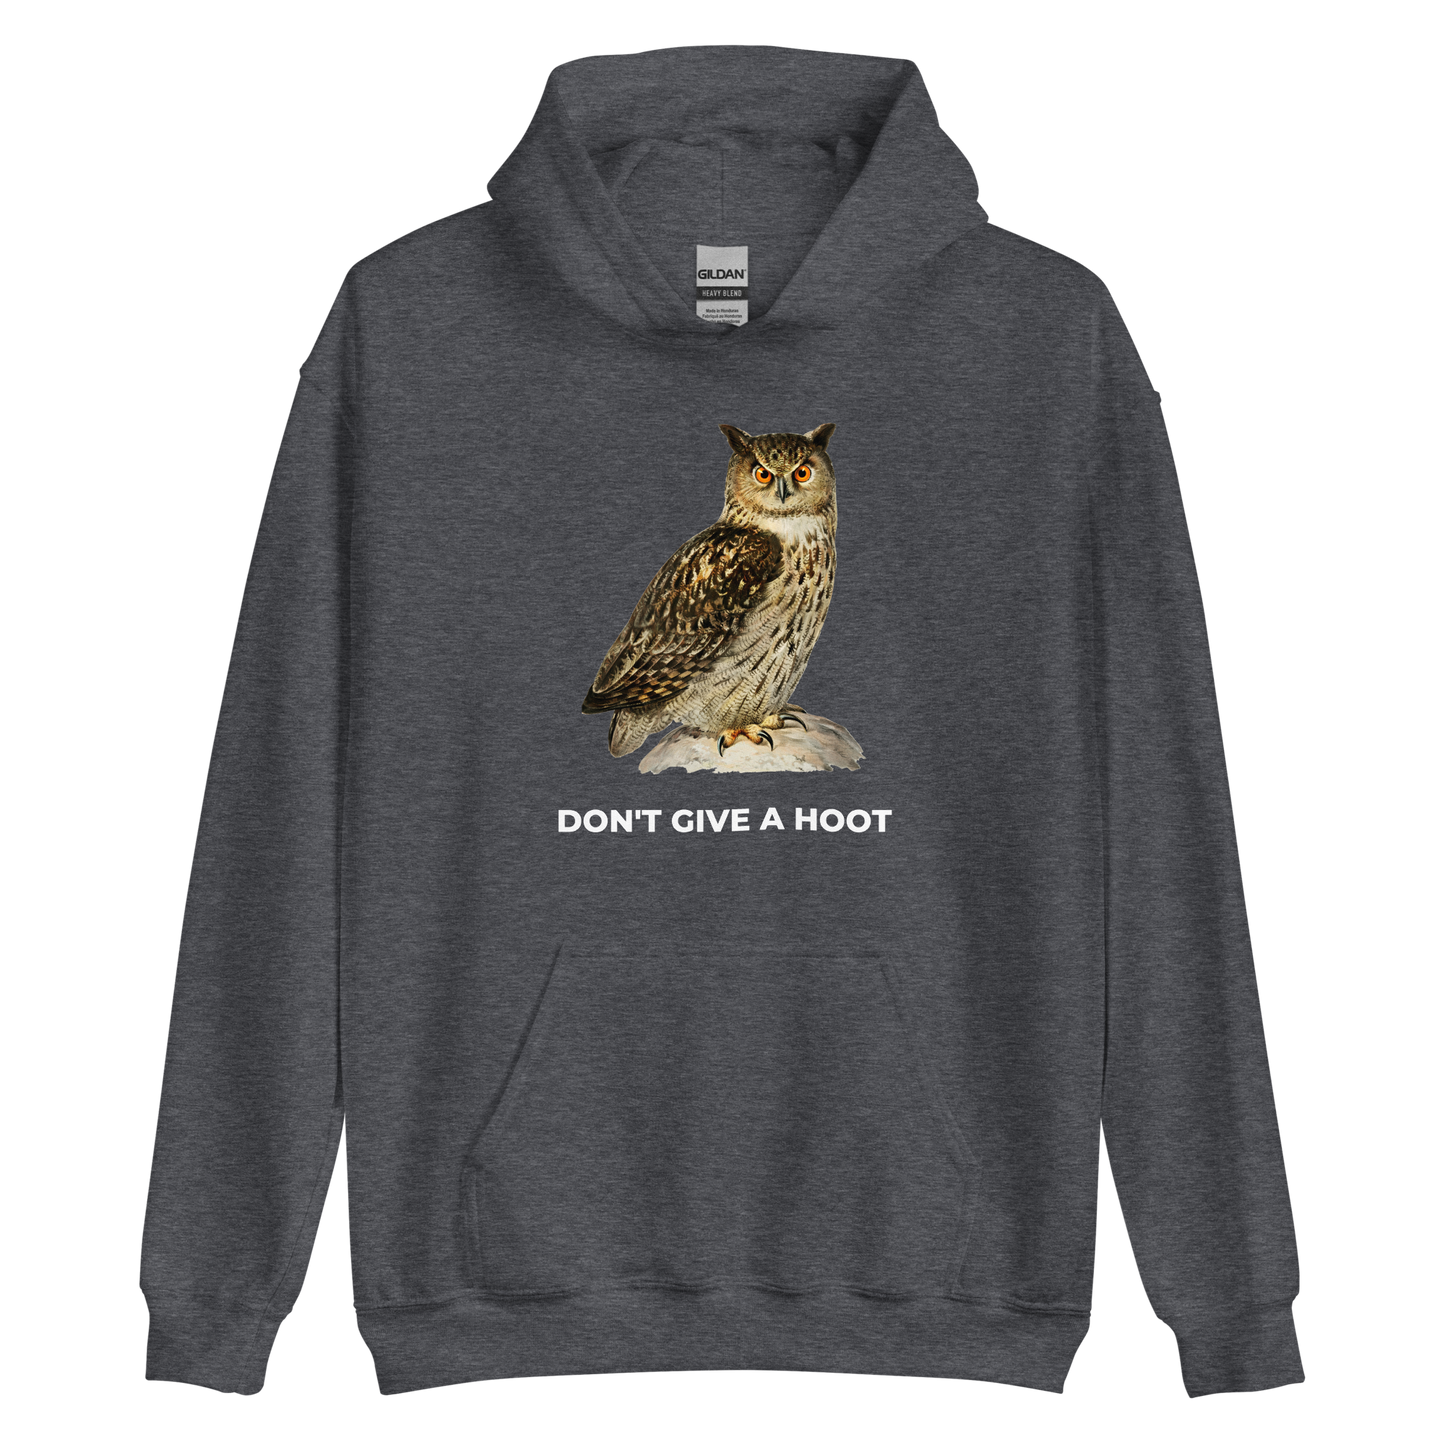 Dark Heather Owl Hoodie featuring a captivating Don't Give A Hoot graphic on the chest - Funny Graphic Owl Hoodies - Boozy Fox